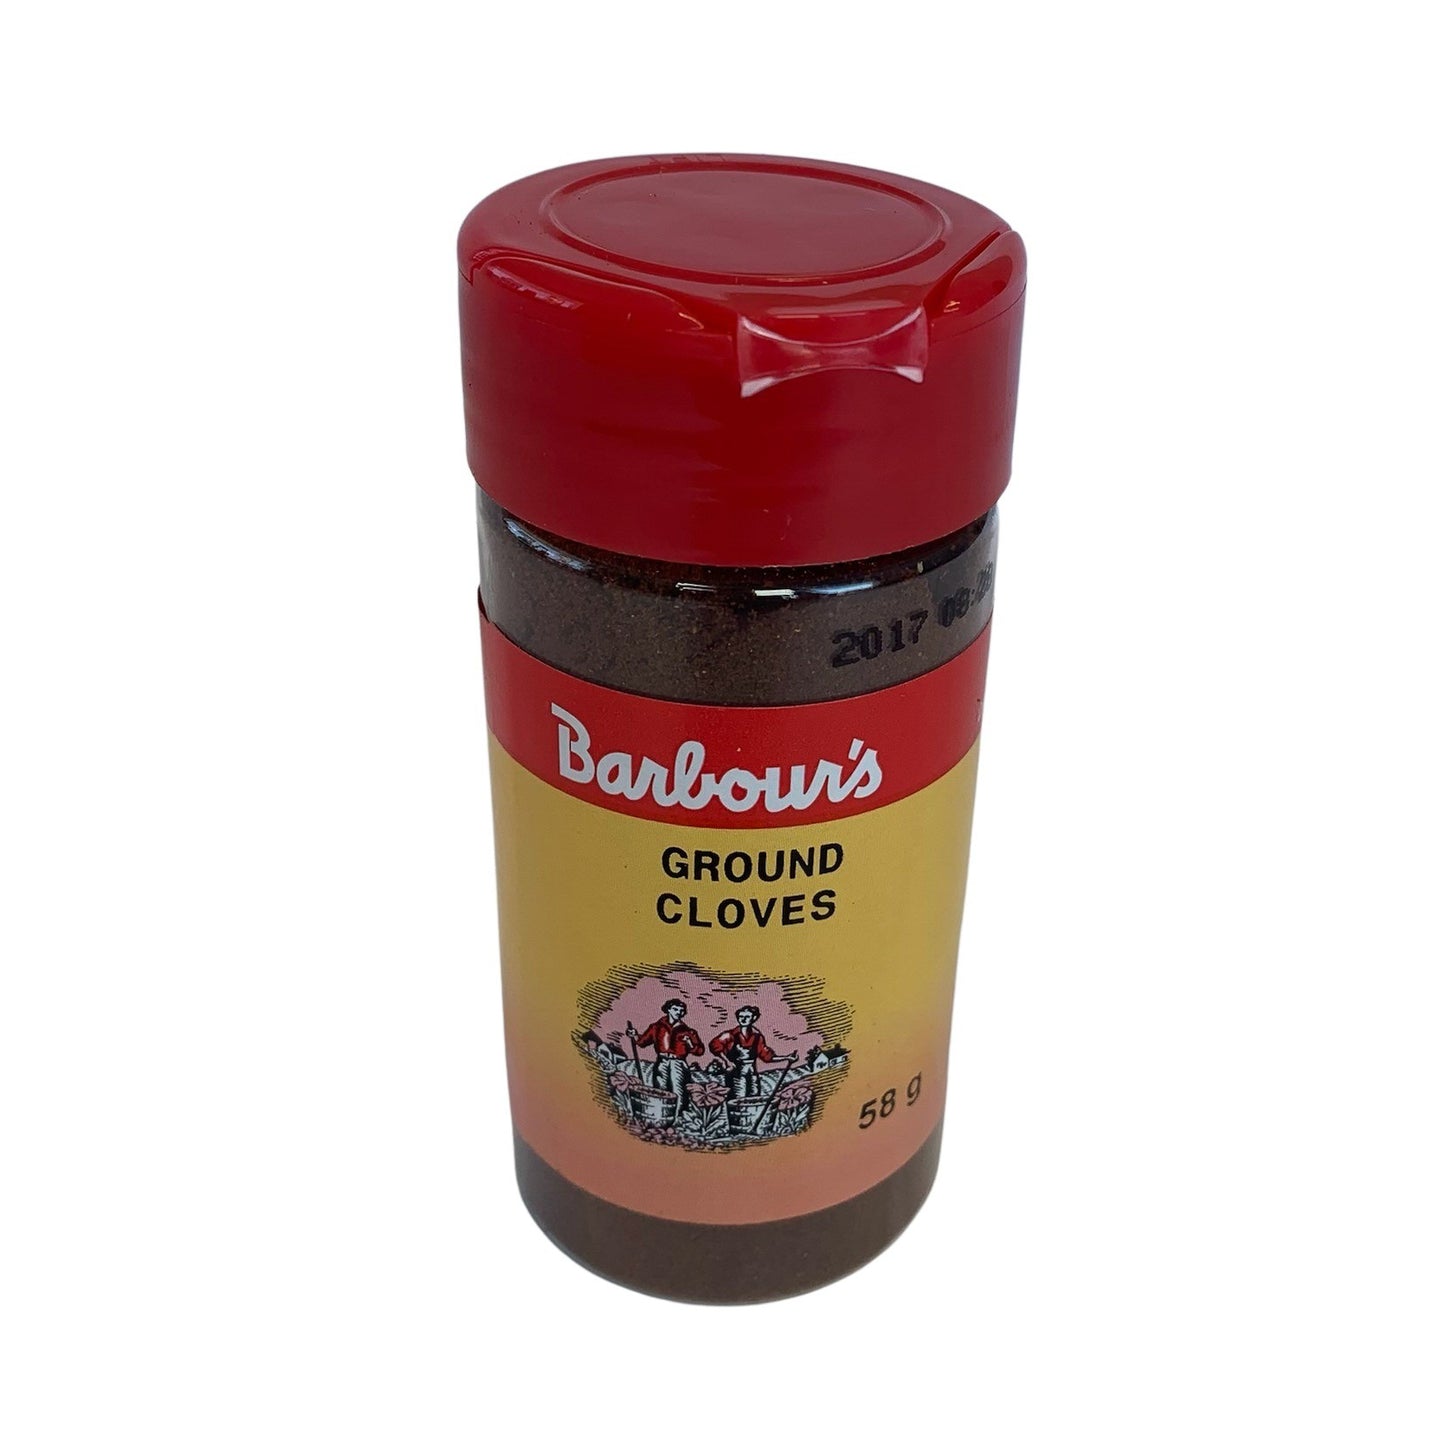 Barbour's Cloves Ground 58g